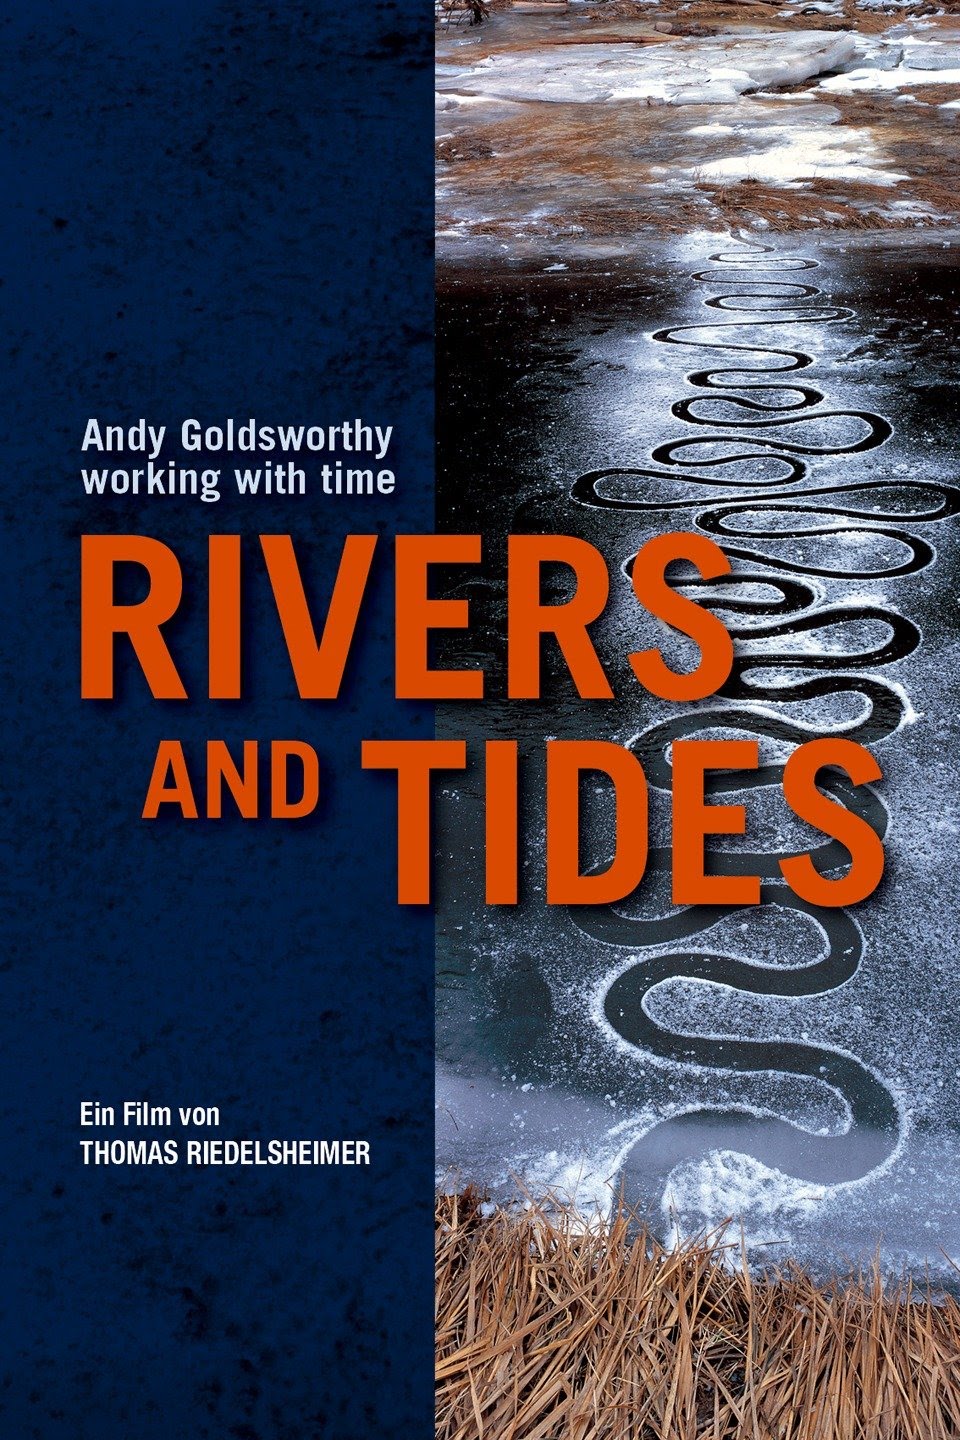 Rivers and Tides: Andy Goldsworthy Working with Time (2001) starring Andy Goldsworthy on DVD on DVD